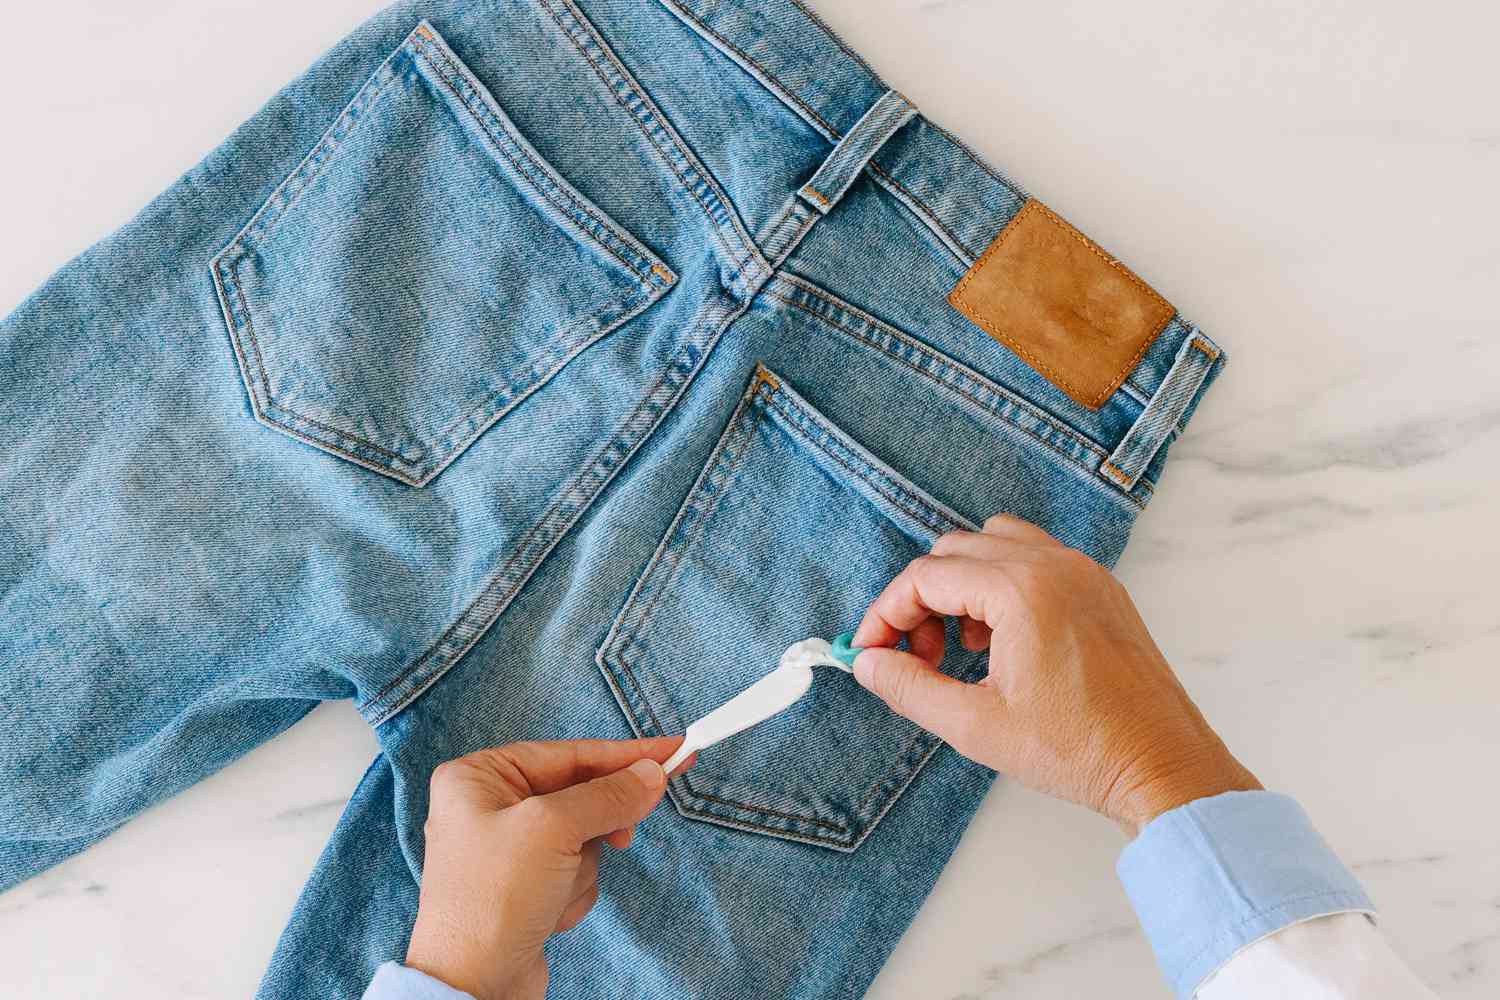 How to remove chewing gum from clothes